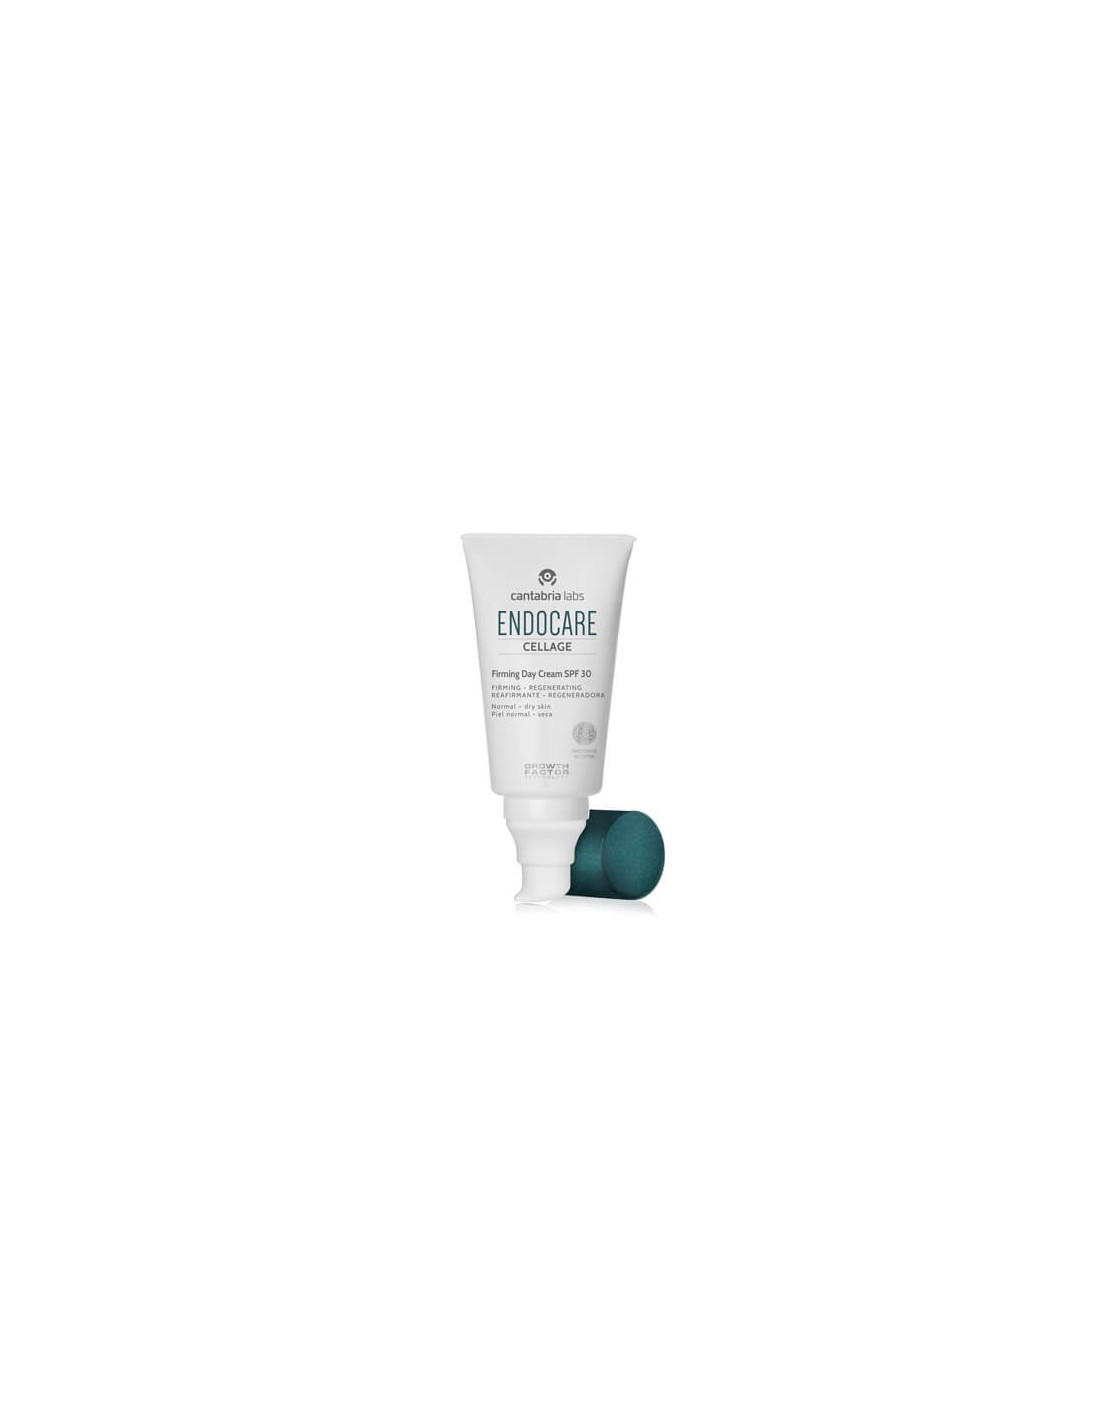 Endocare Cellage Firming Day Cream Spf30 50ml